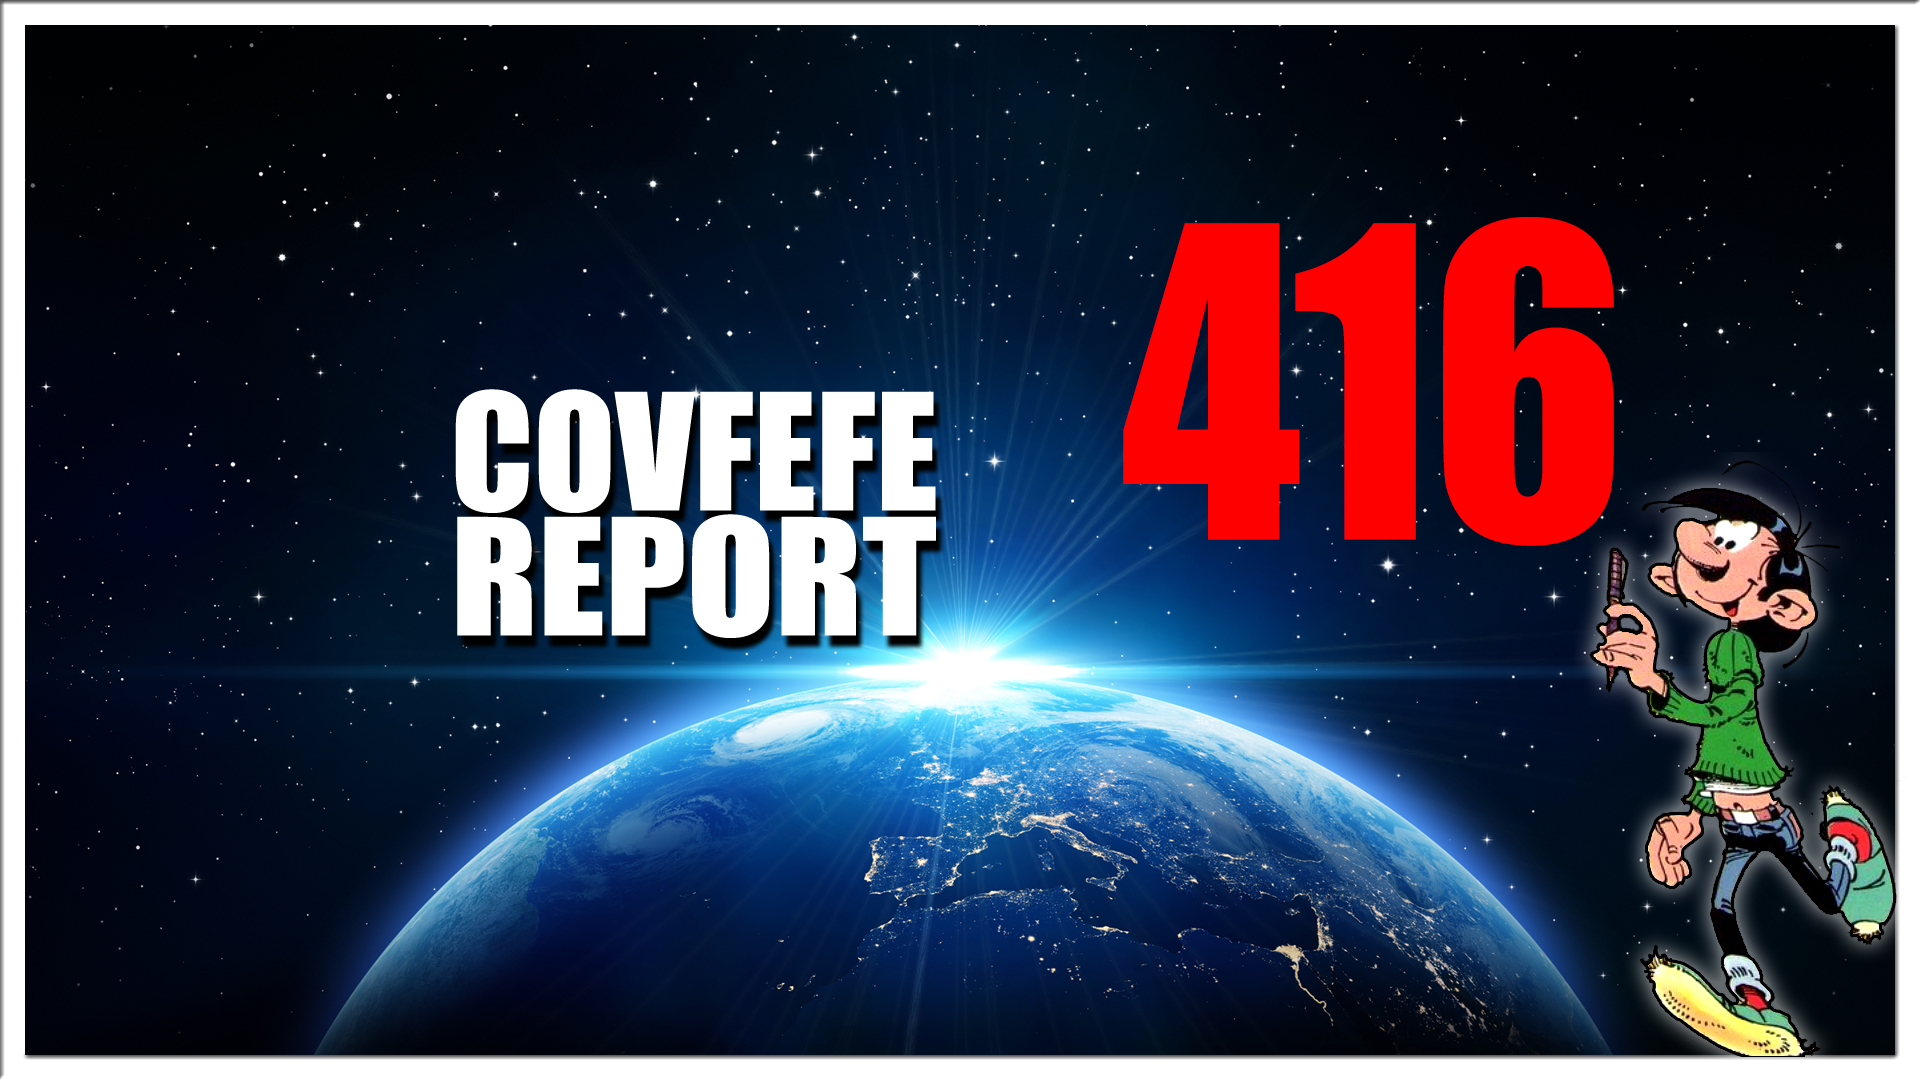 Covfefe Report 416. Teams on standby, Burgers staan op, World Wide Rally